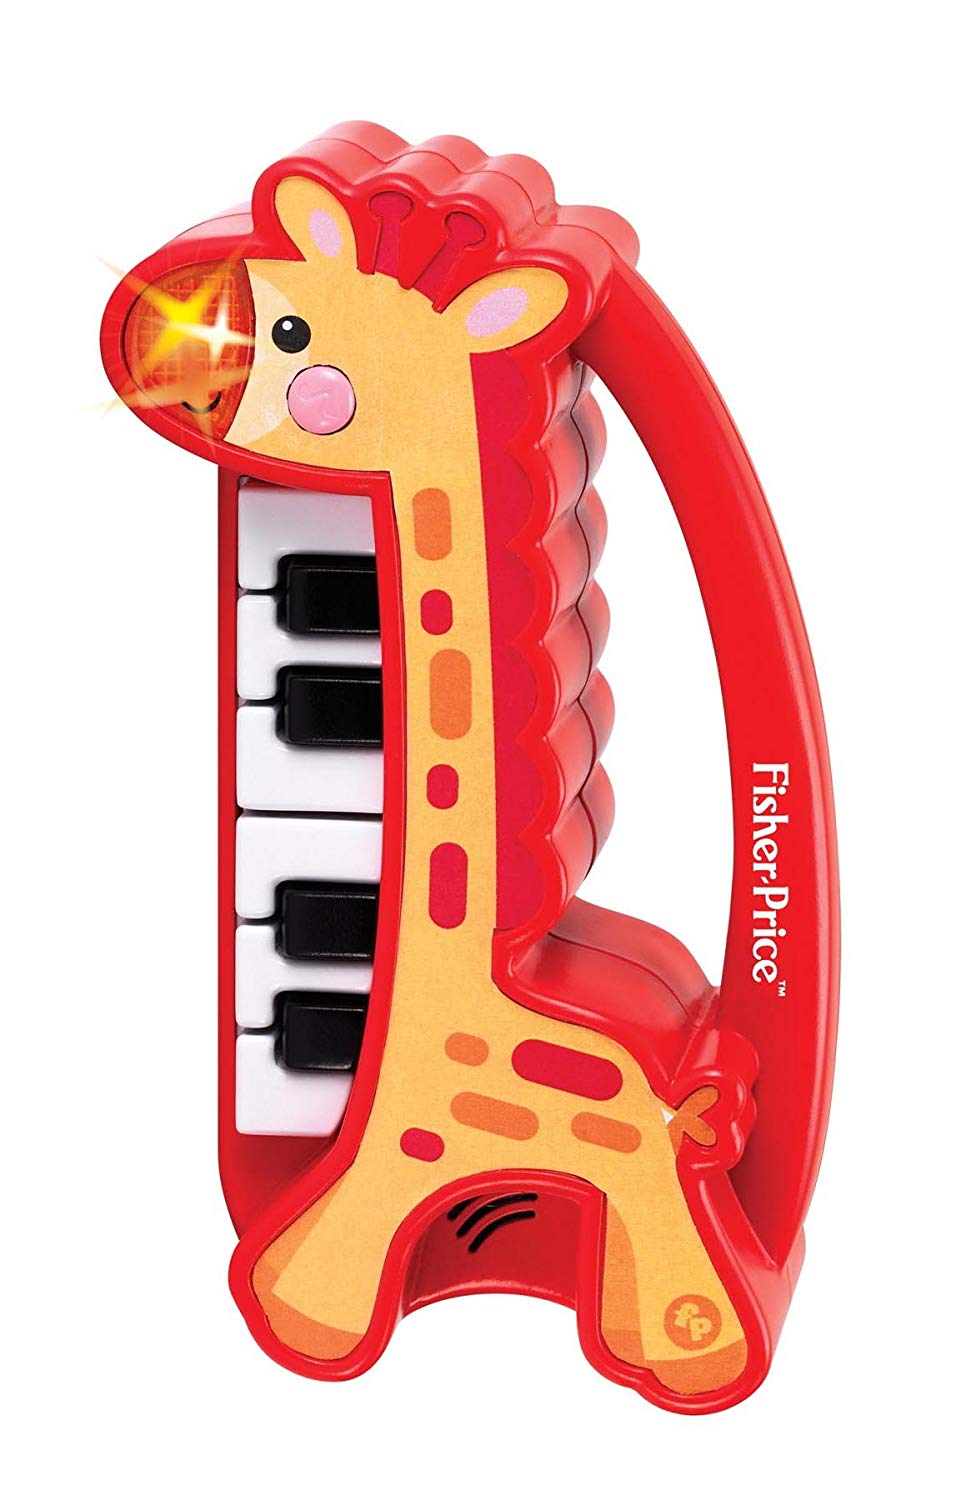 Fisher Price My First Real Piano Toy